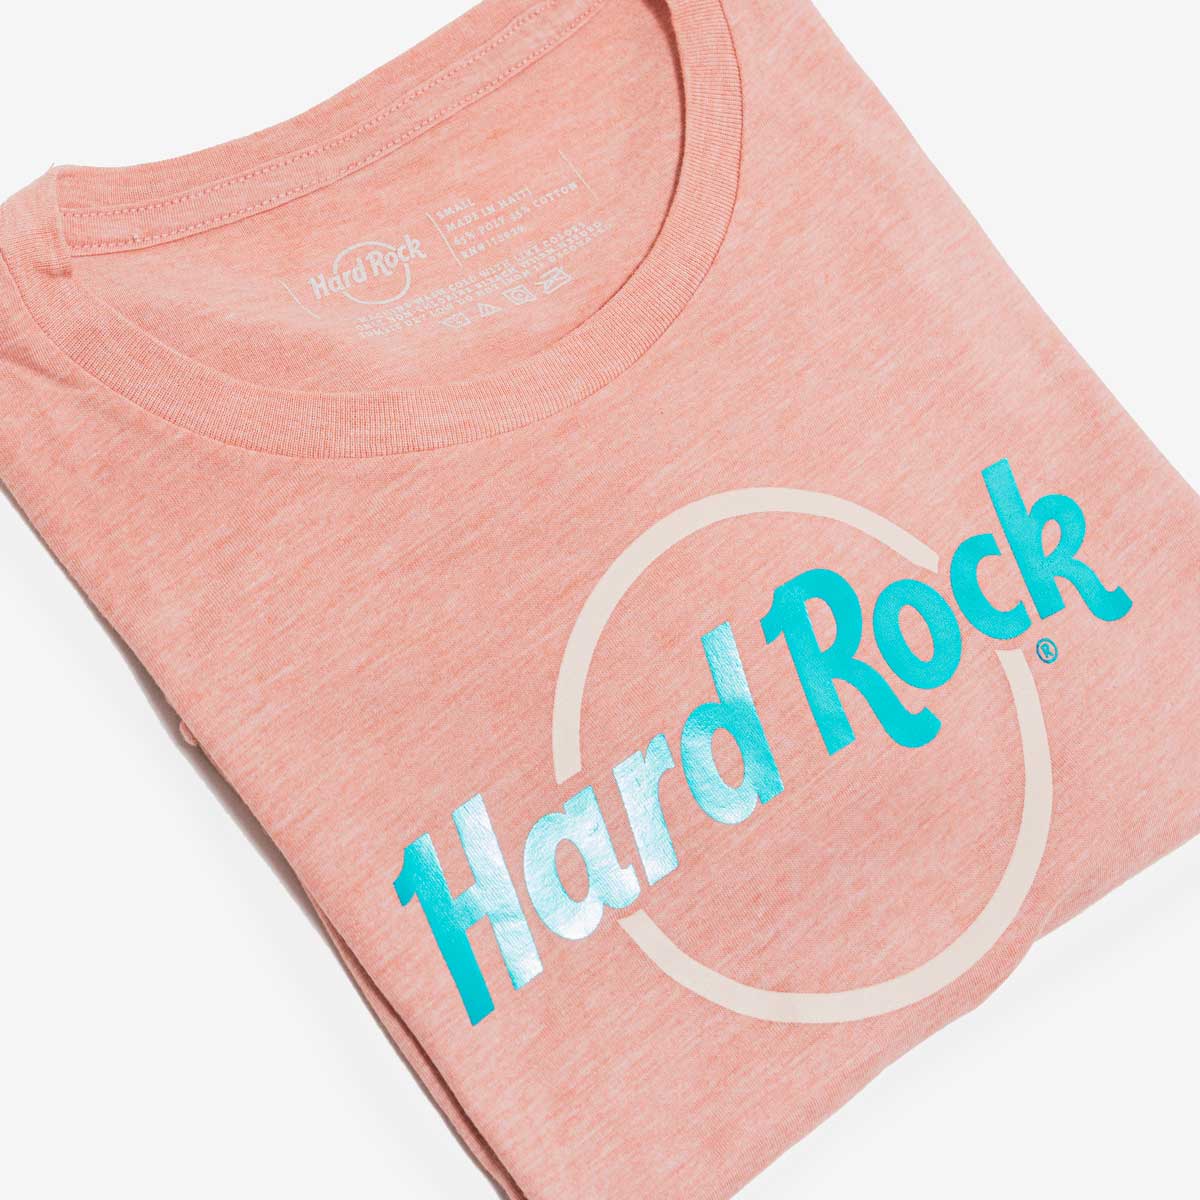 Hard Rock Pop of Color Cropped Tee in Pink and Teal image number 2